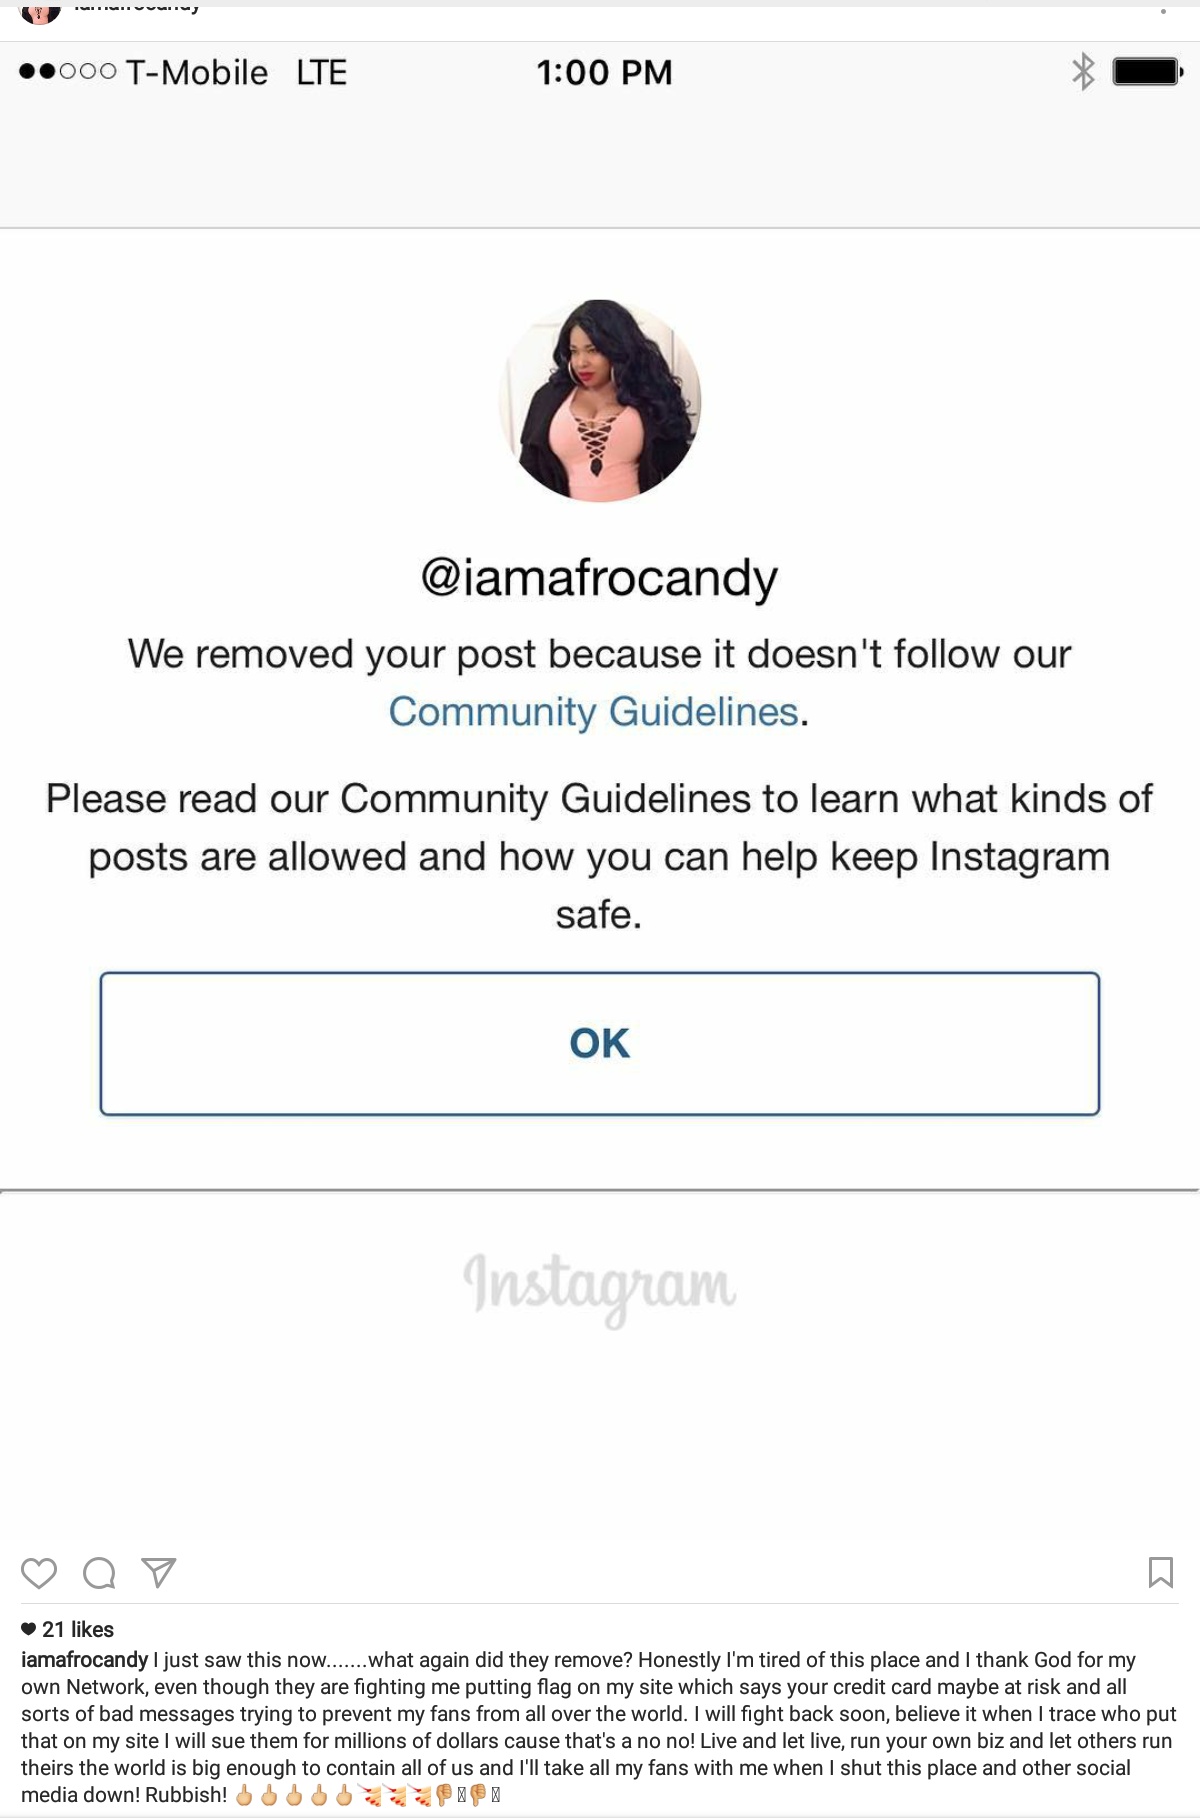 Afrocandy Has Threatened To Sue Instagram Over Discrimination